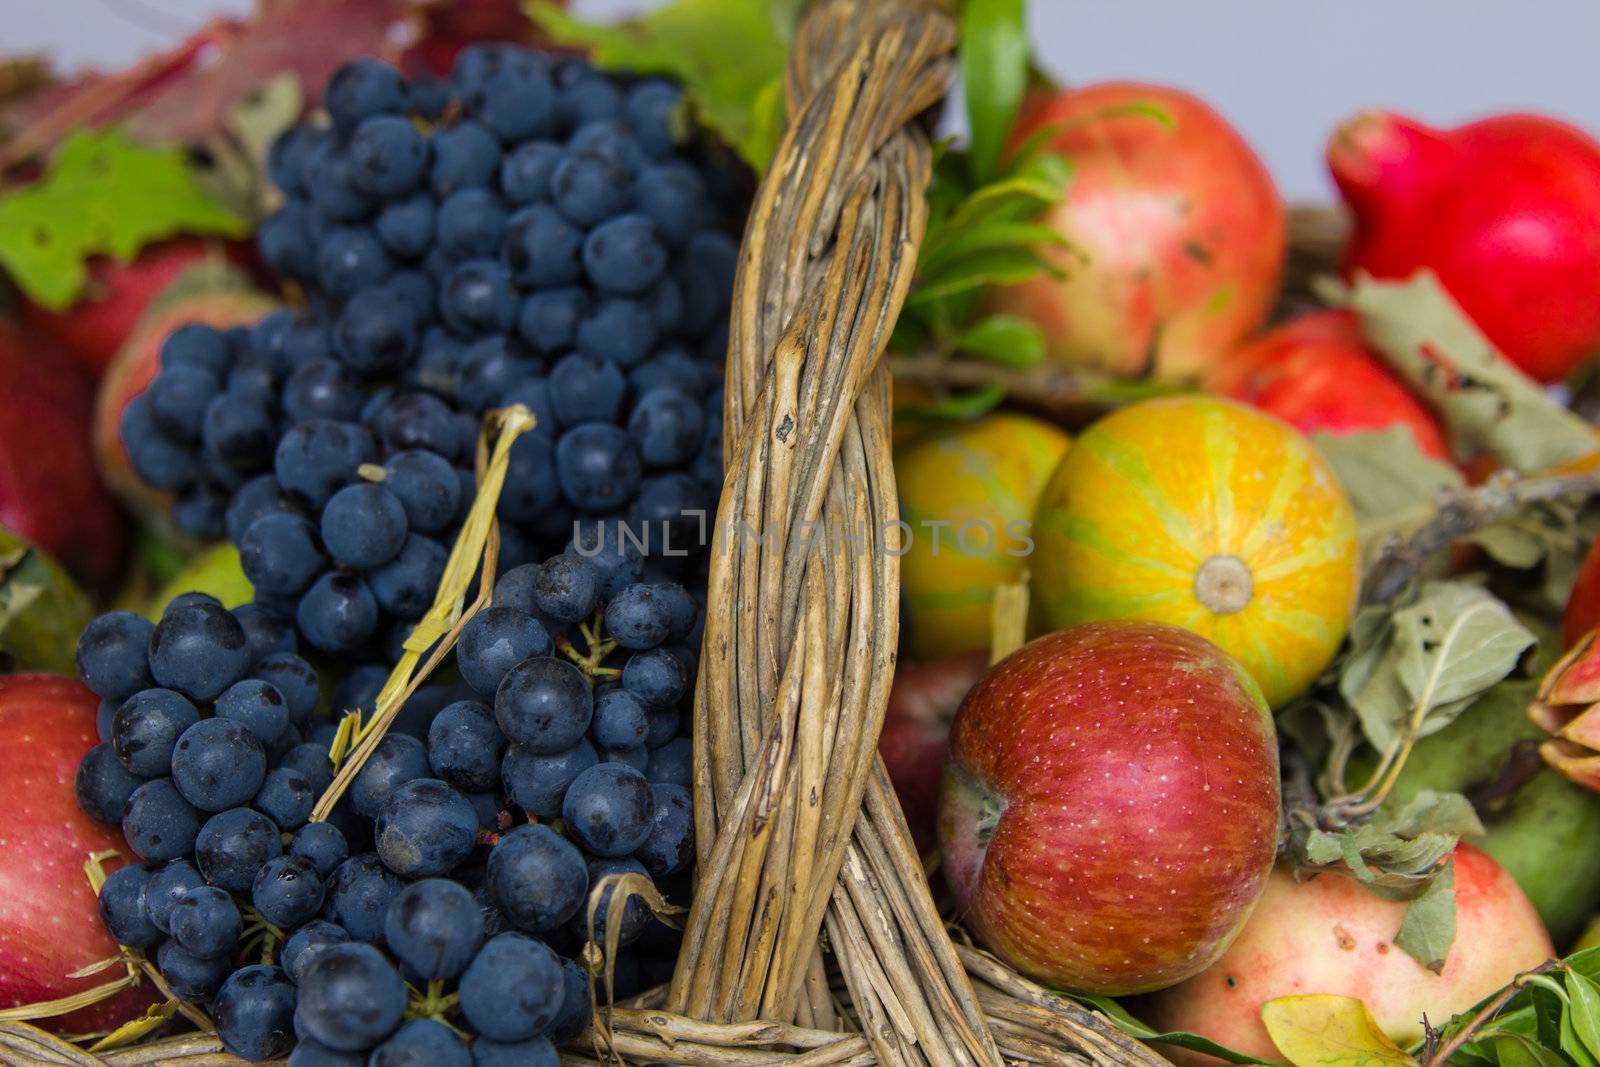 Bunch of fresh fruit from the autumn season